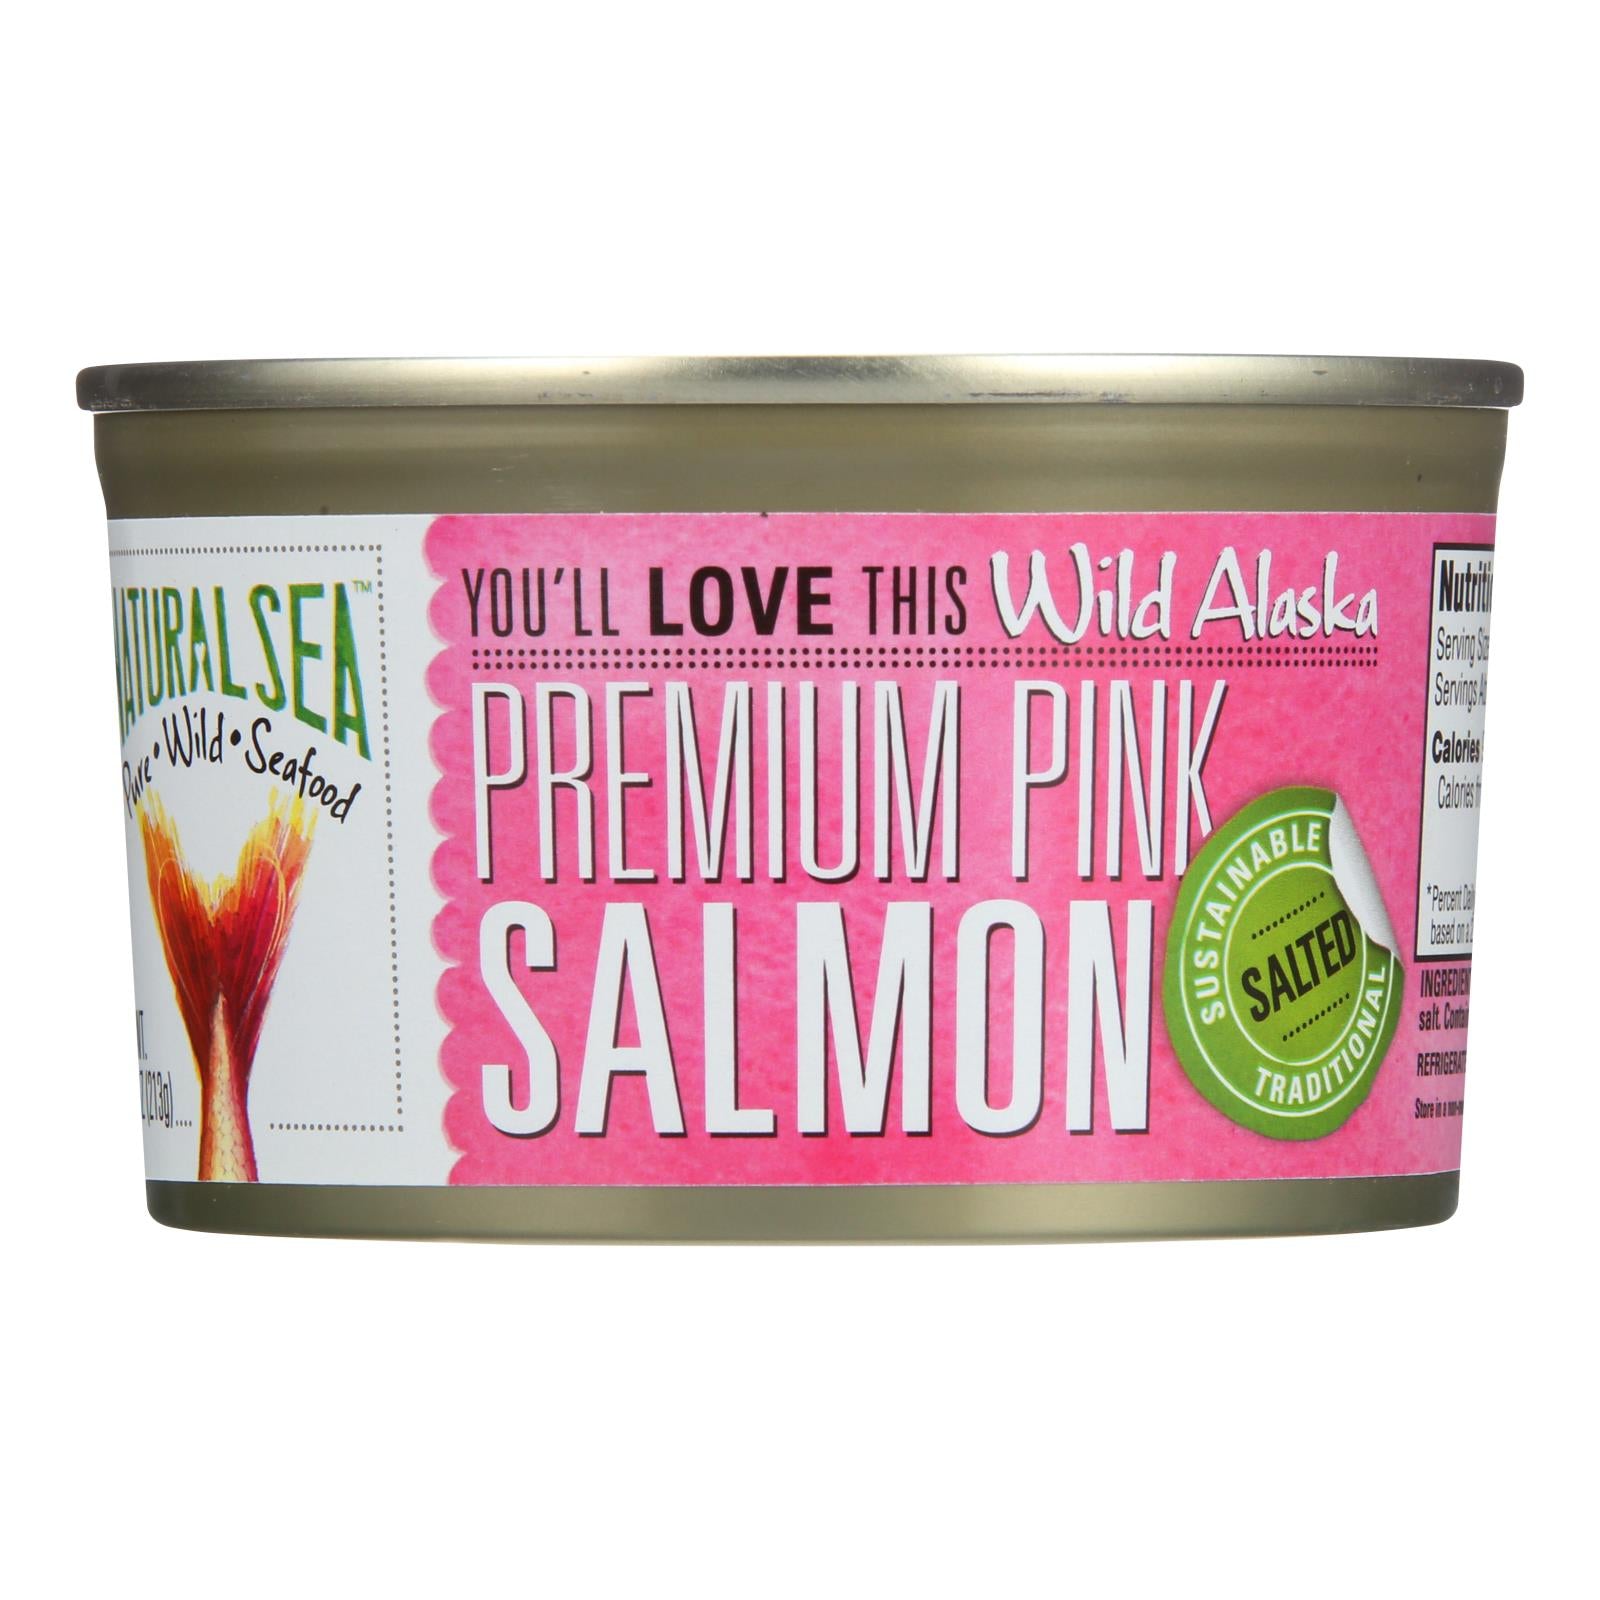 Natural Sea Wild Pink Salmon, Salted - Case Of 12 - 7.5 Oz